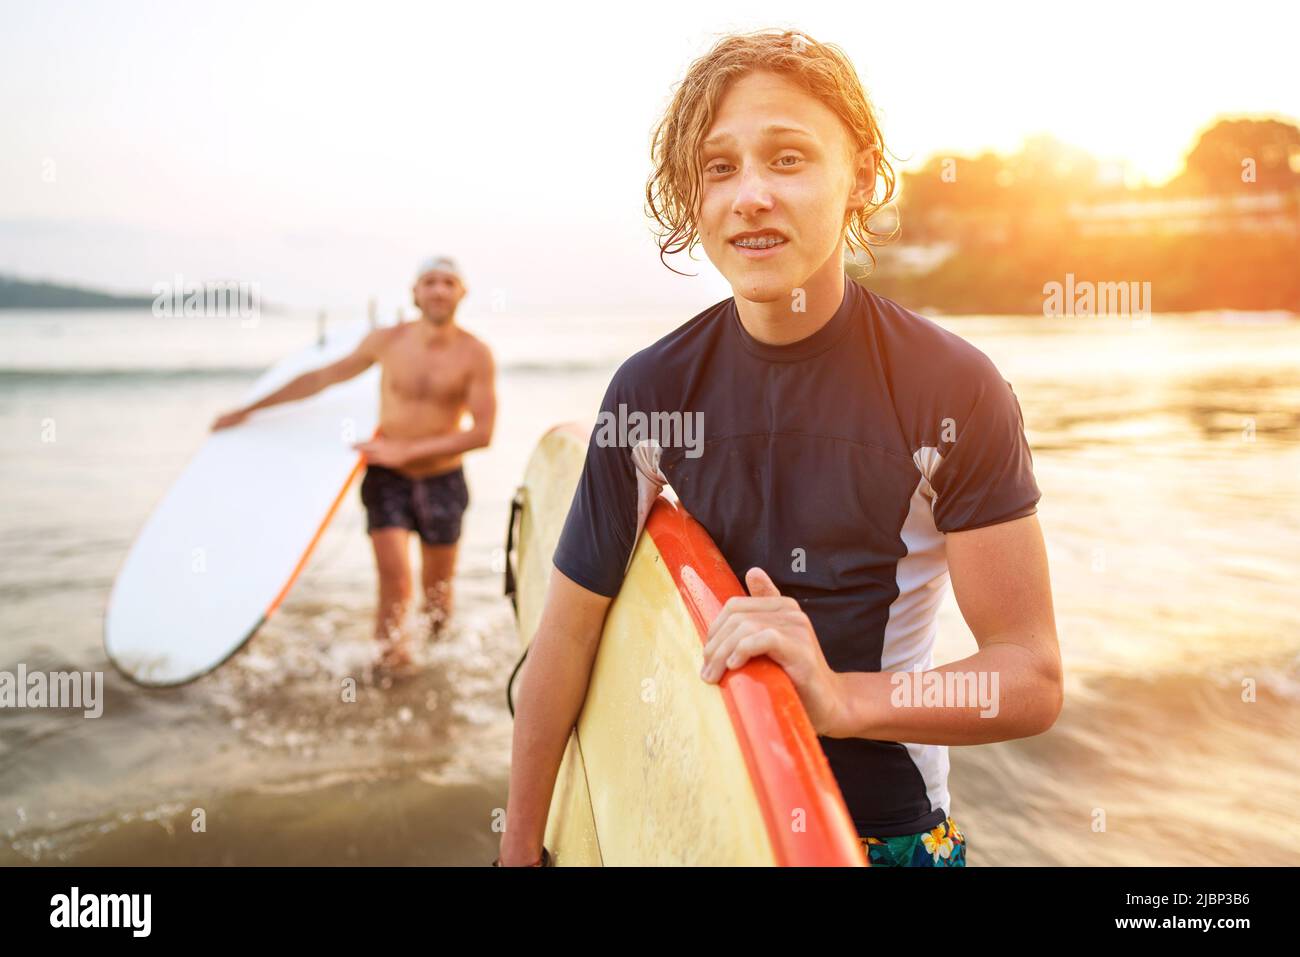 Young teenager blond boy with a father carrying surfboards as they walking ocean sandy beach after surfing with beautiful sunset background. They are Stock Photo